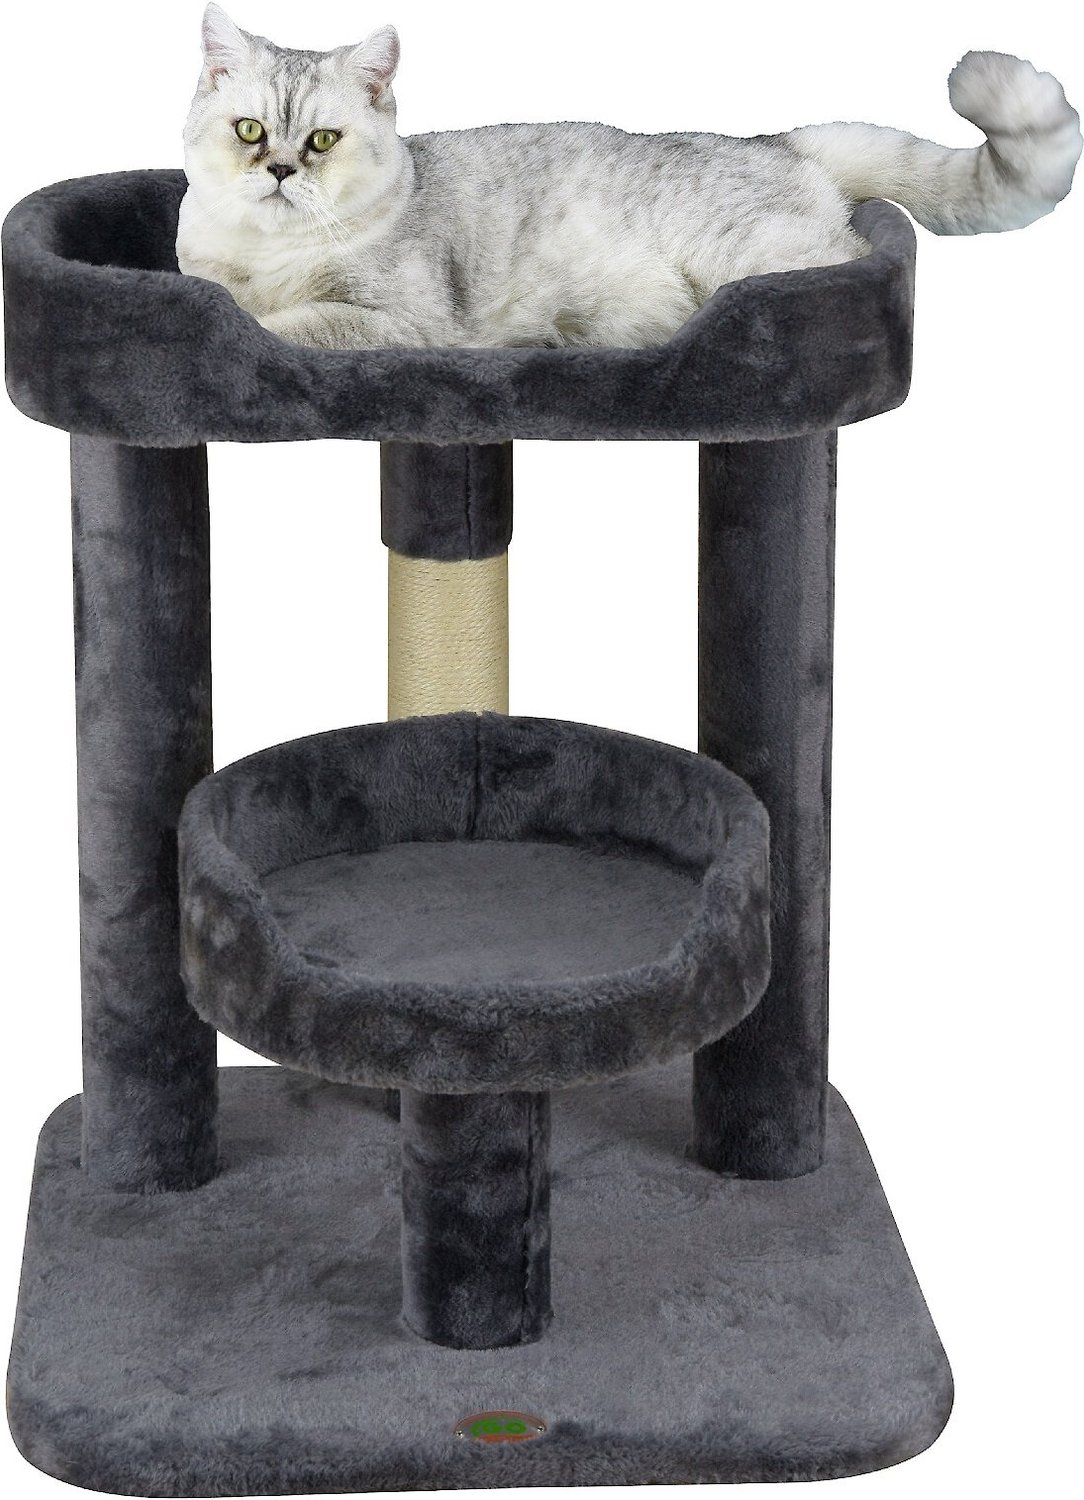 10 Most Affordable Cat Trees That Are Worth-It (2022 Review)